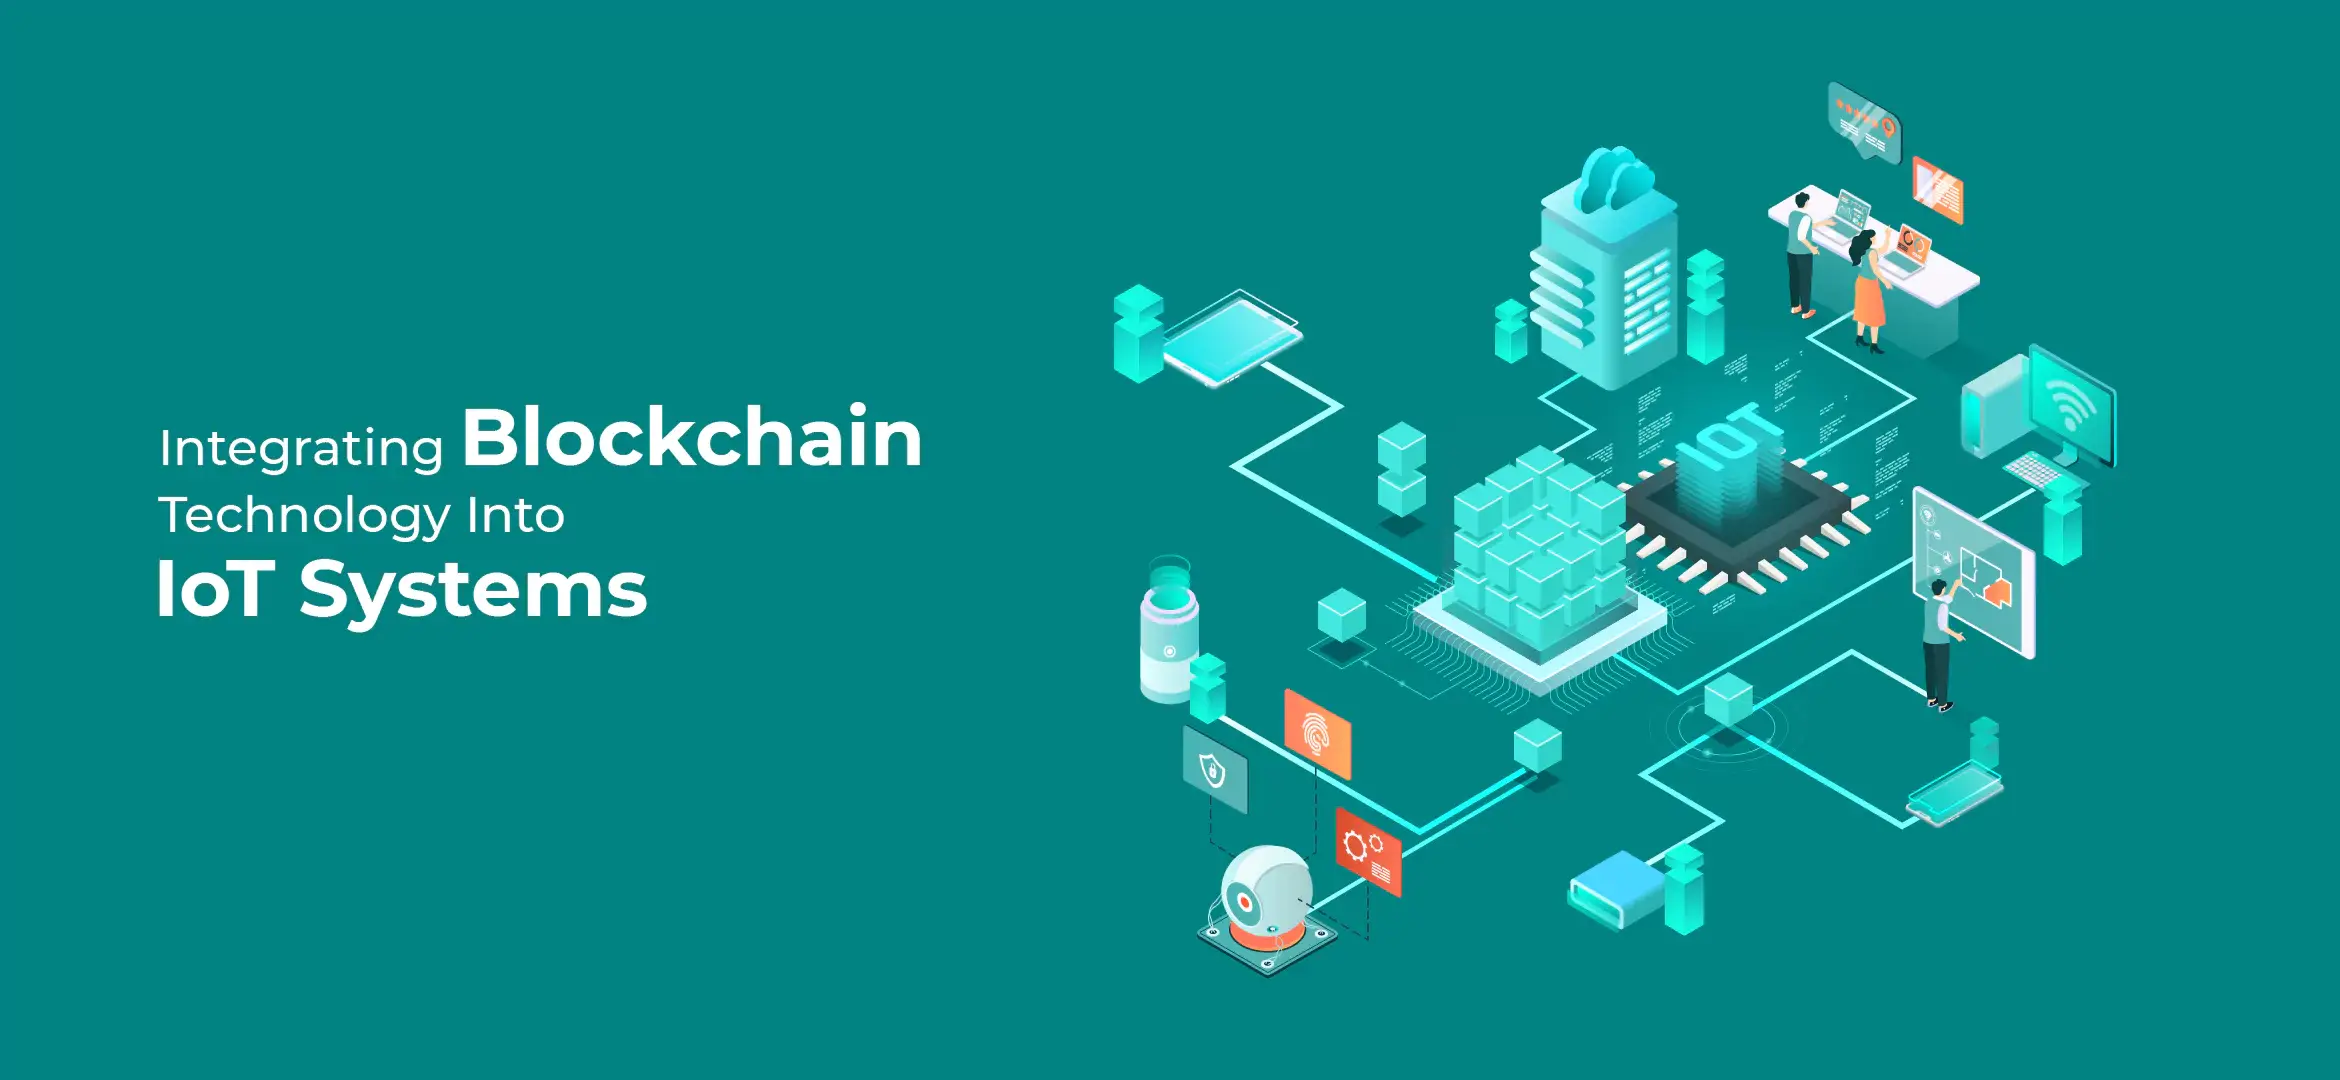 1709793707Integrating Blockchain Technology into IoT Systems.webp